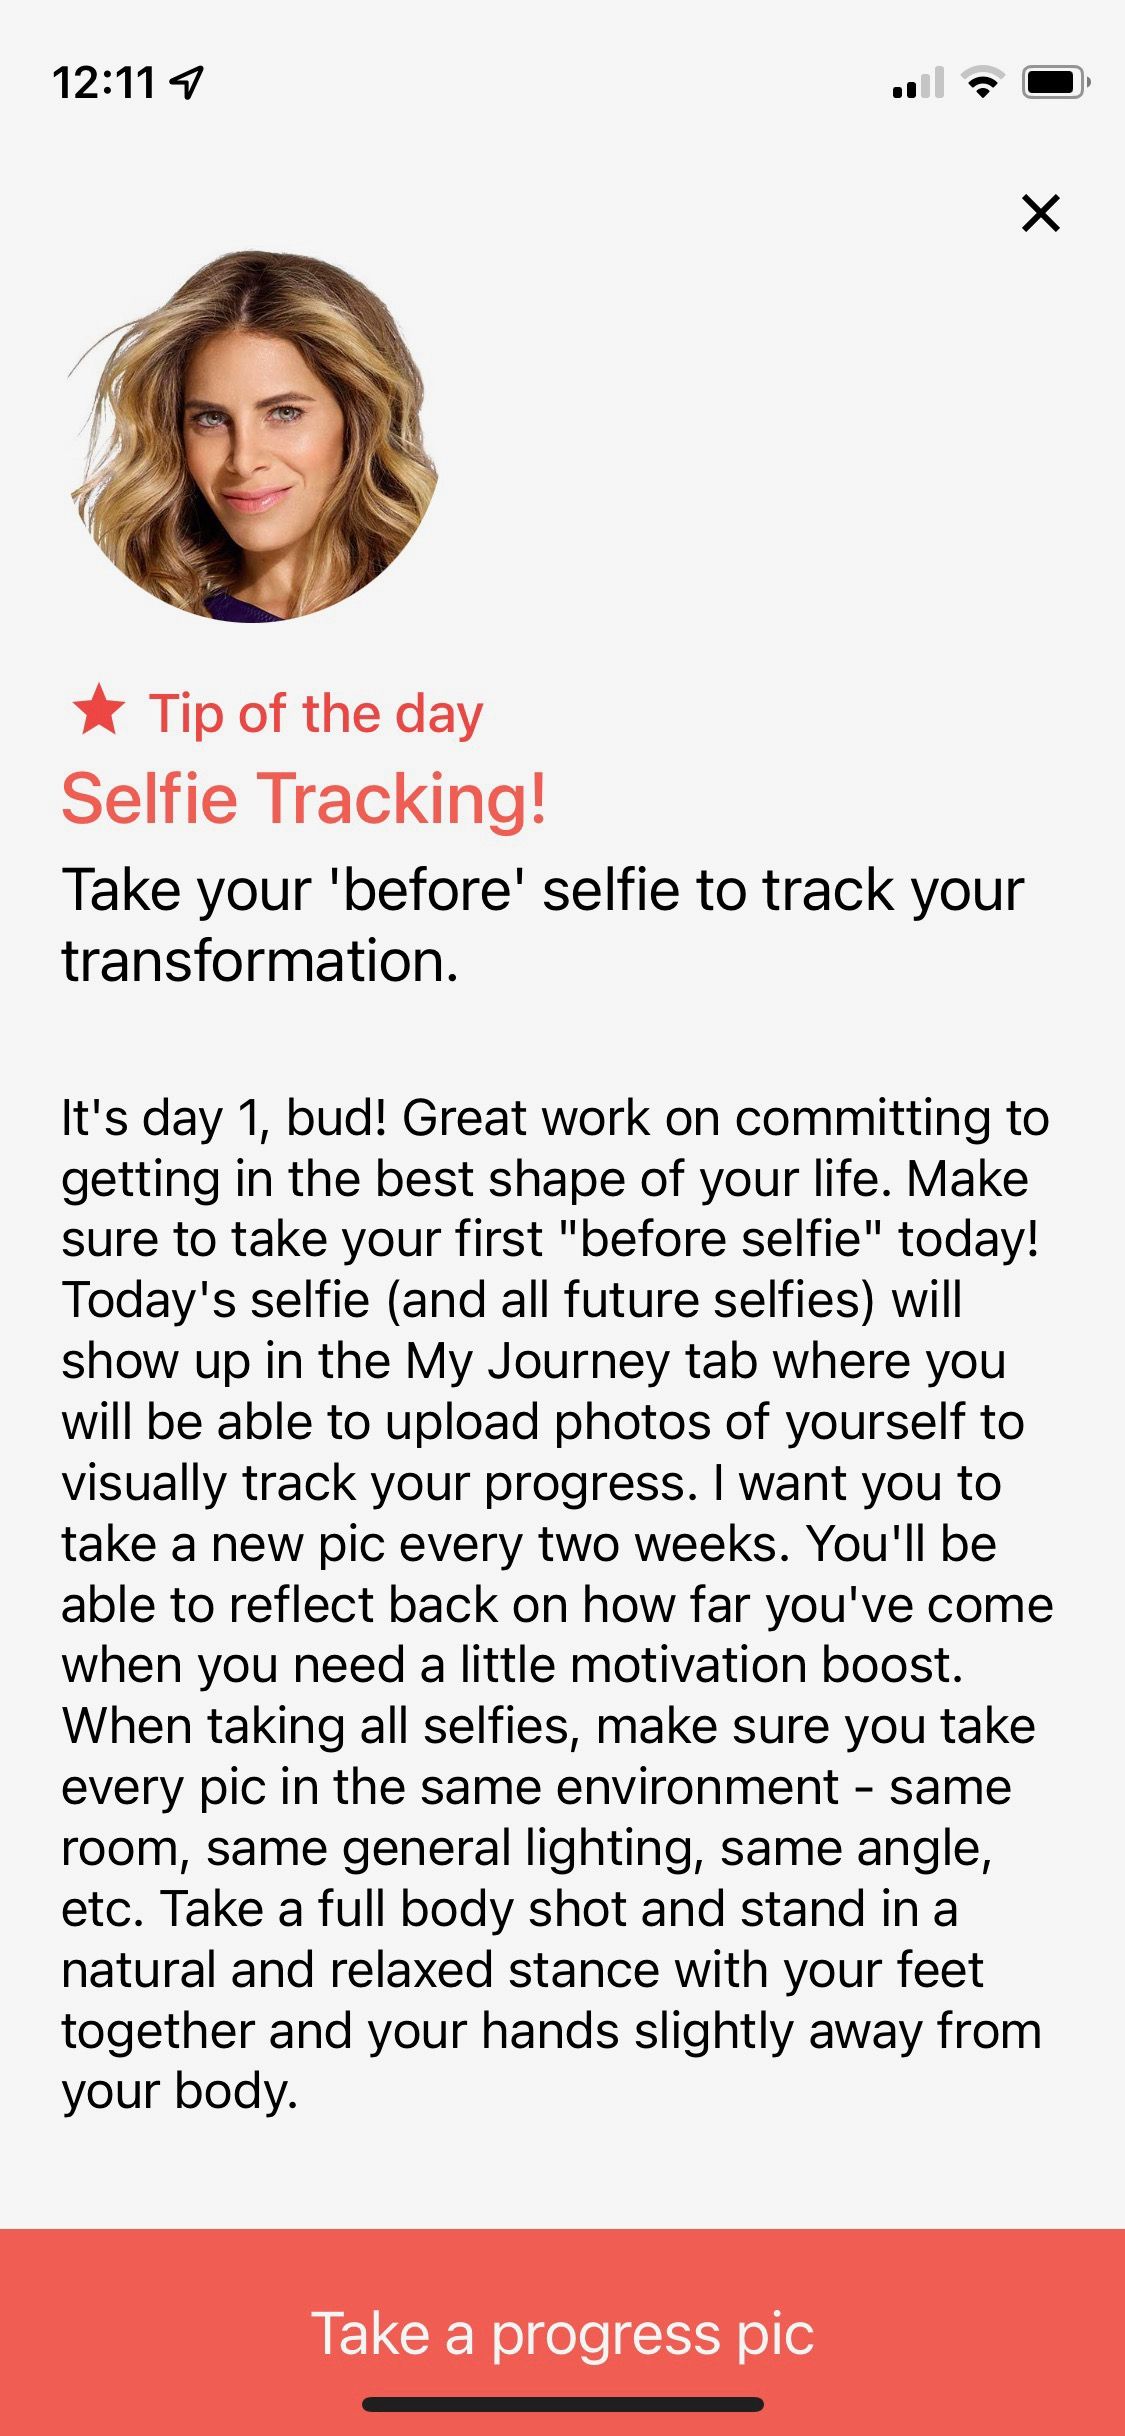 Screenshot from Jillian Michaels app showing sample tip of the day